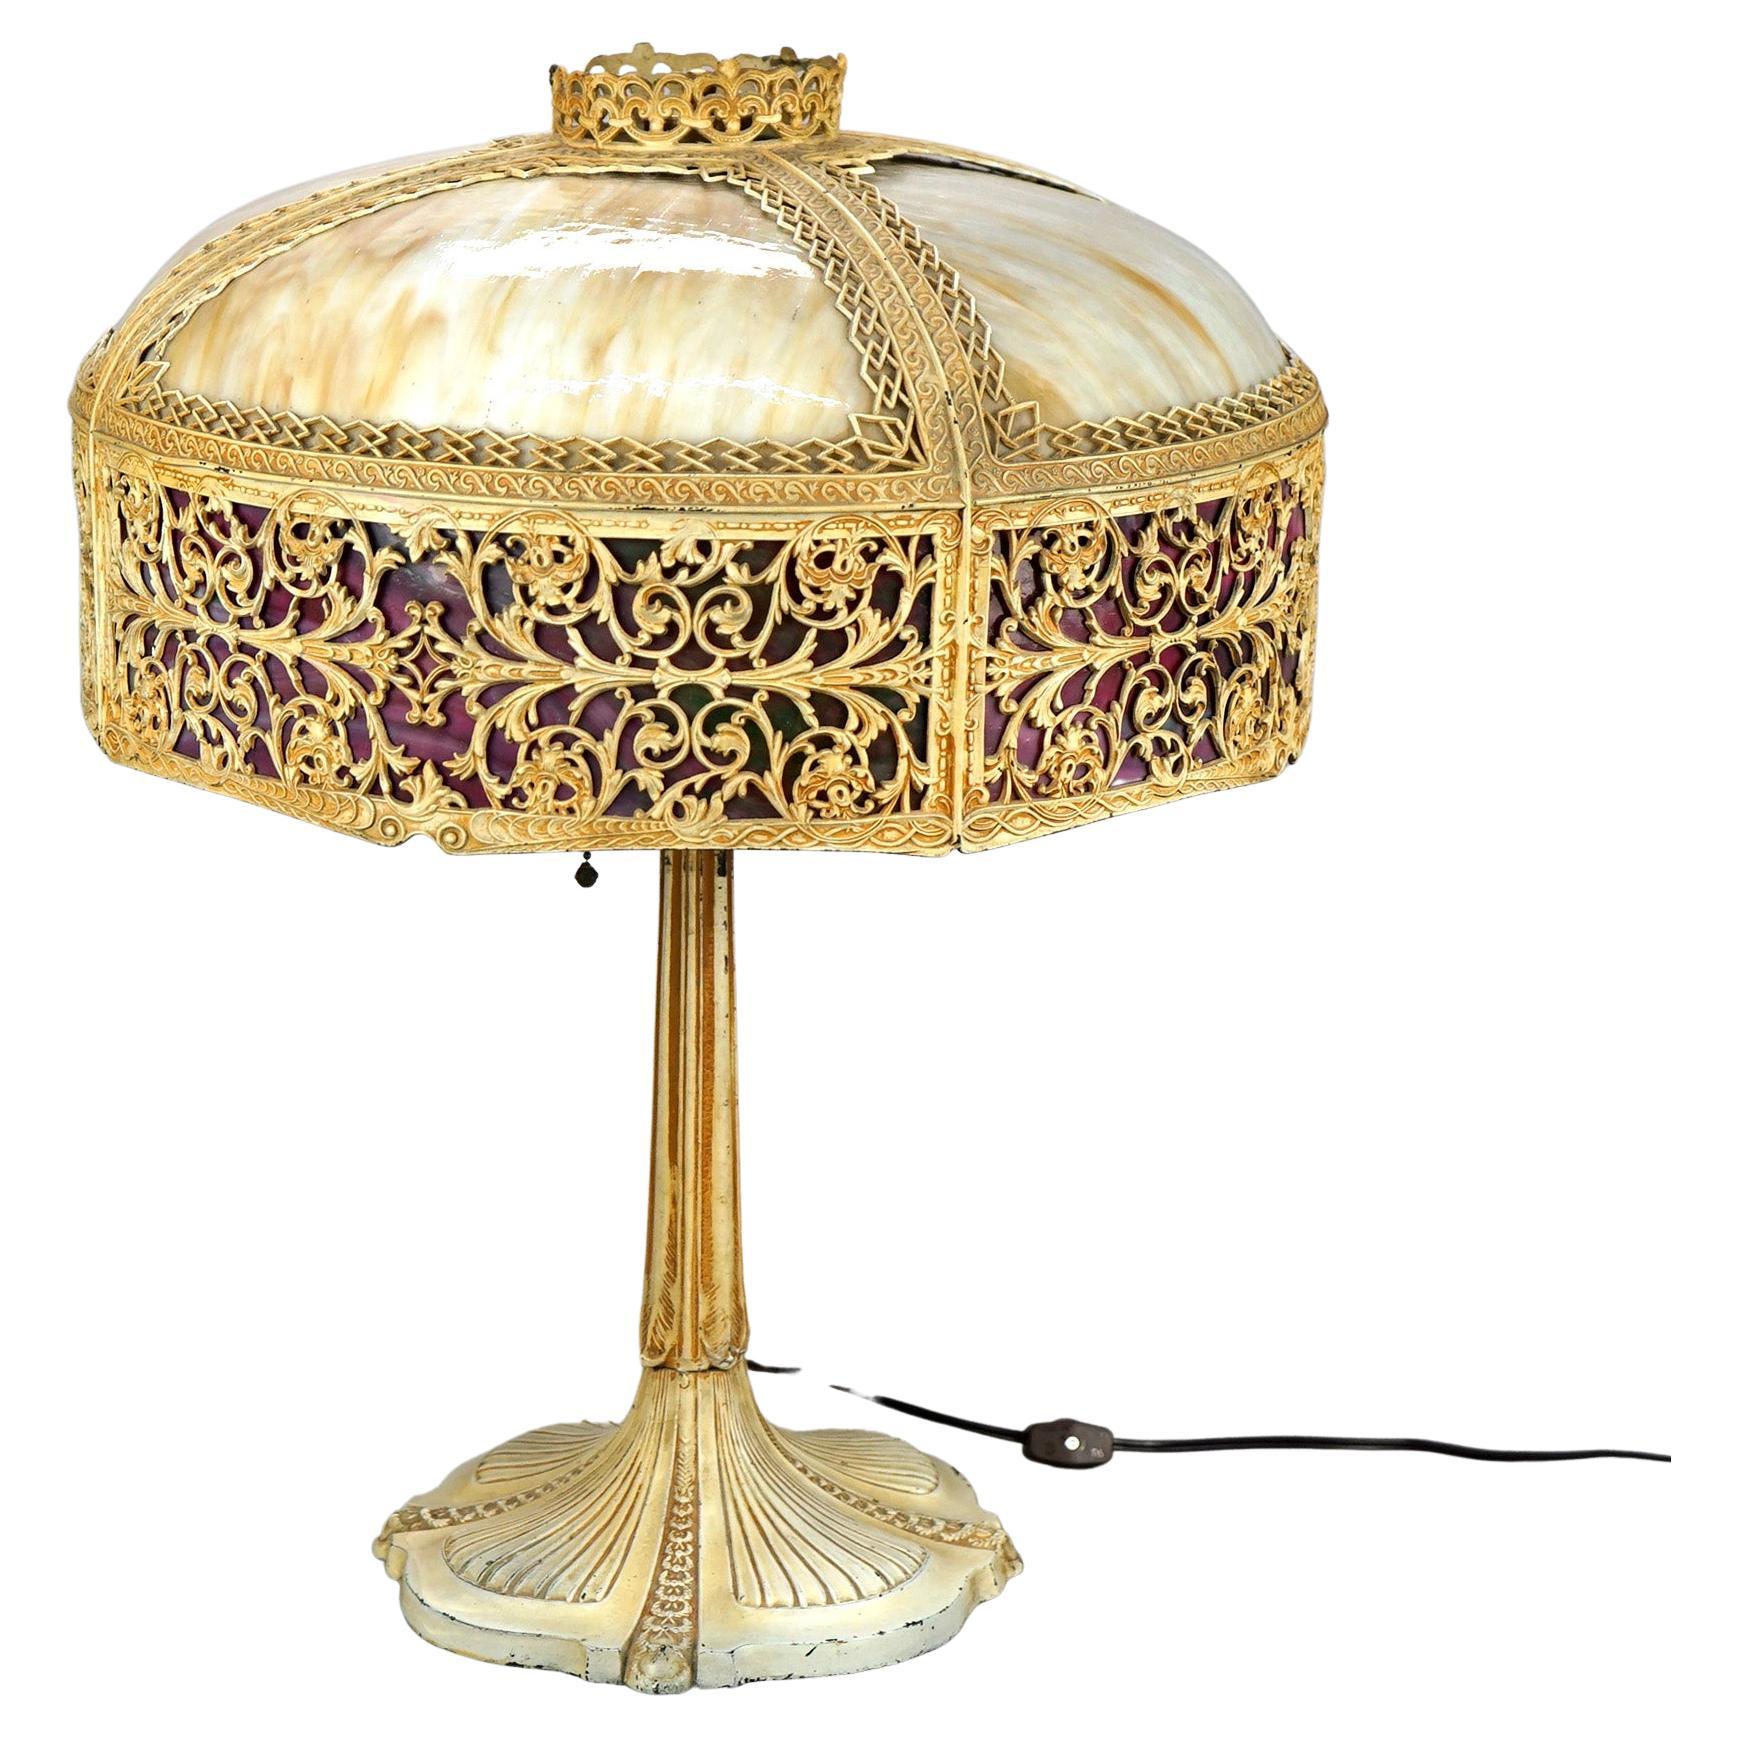 An antique Arts and Crafts table lamp in the manner of Bradley and Hubbard offers dome form cast shade with filigree foliate band and housing two-tone slag glass over double socket cast base, c1920

Measures- 22 3/4 x 17 1/2.

